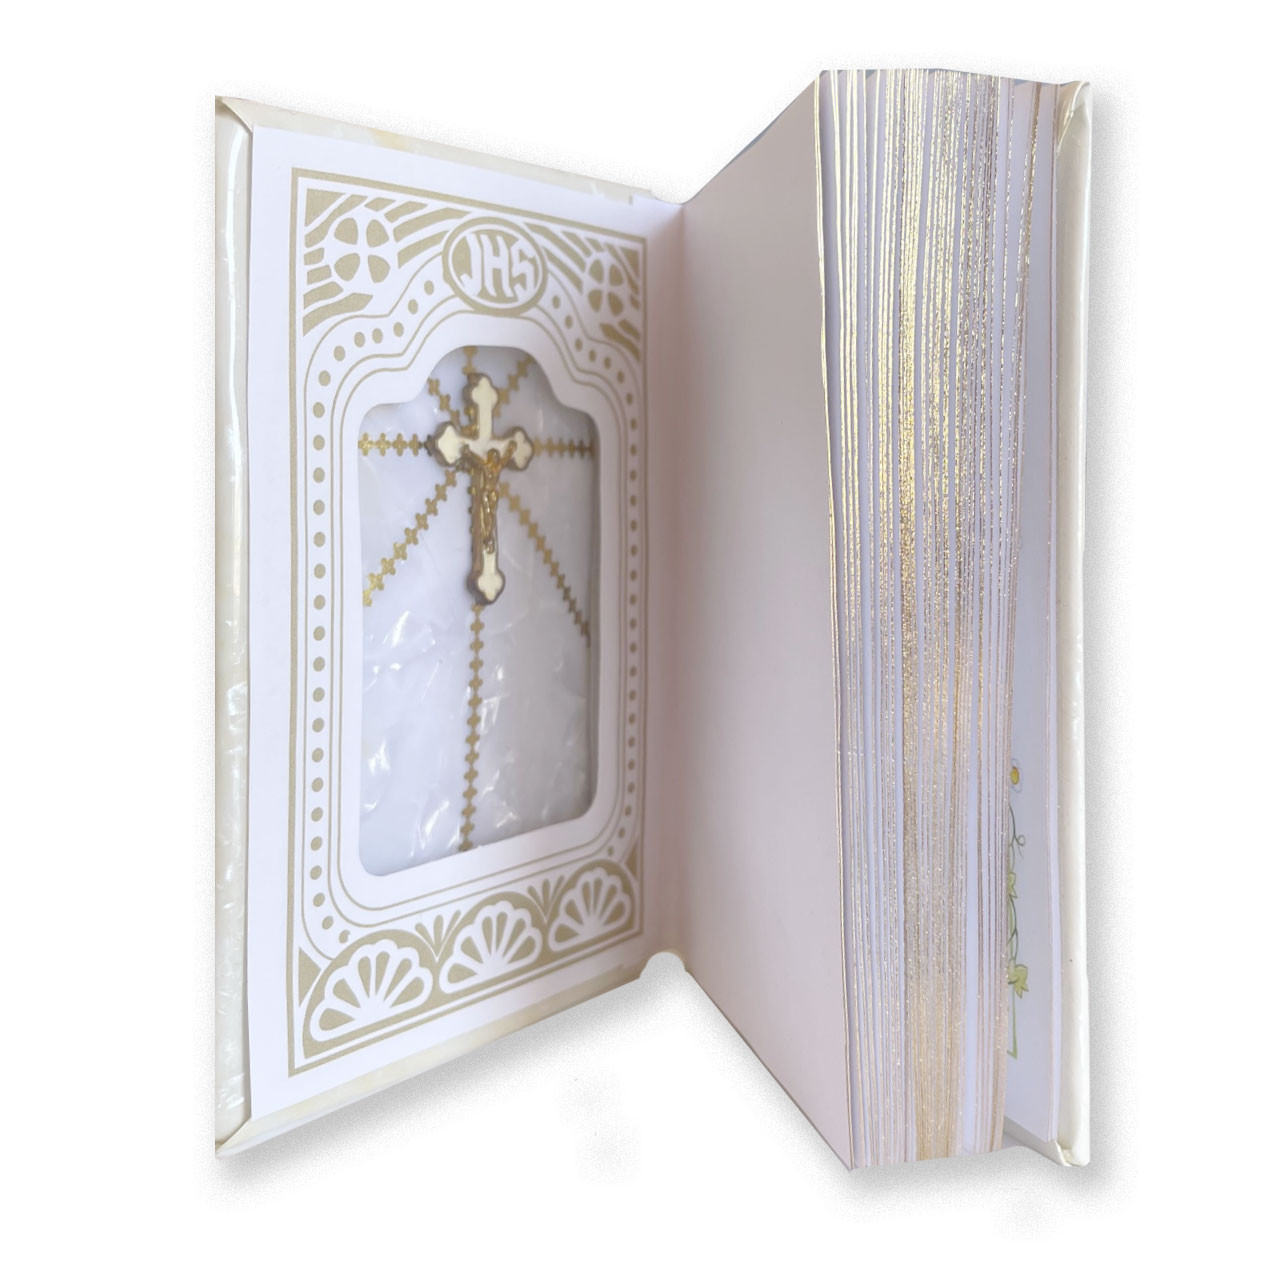 Inside Crucifix and gilded pages of the Girl's Spanish Pearl First Communion Missal